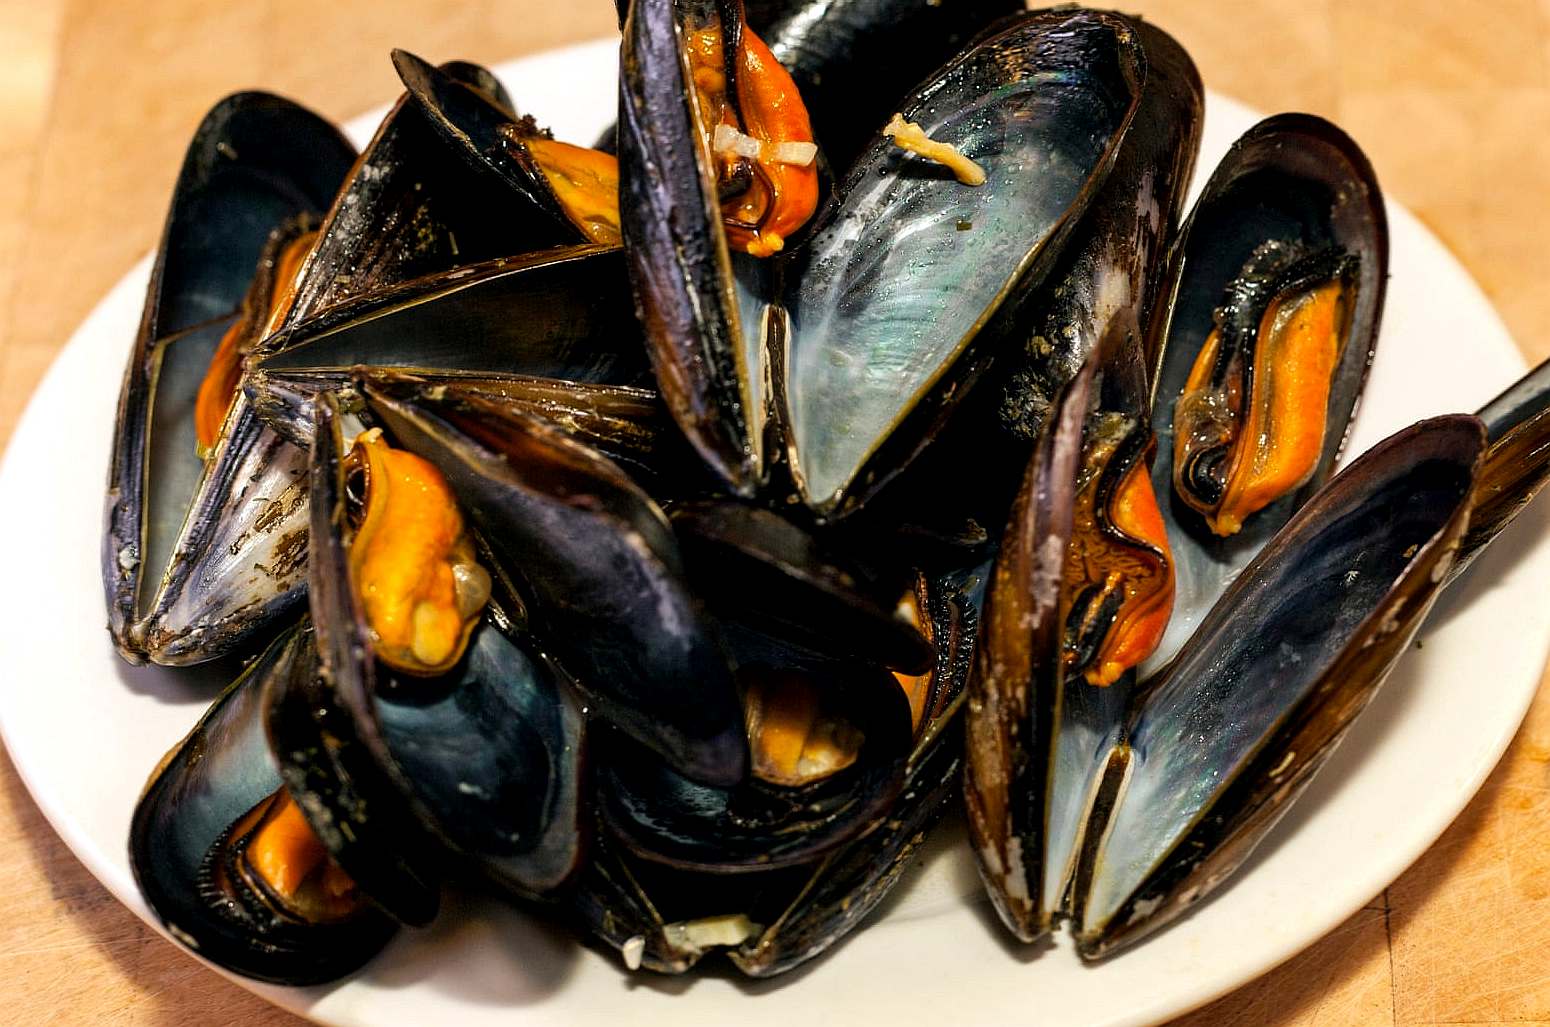 Shellfish, mussels laden with plastic microfibers